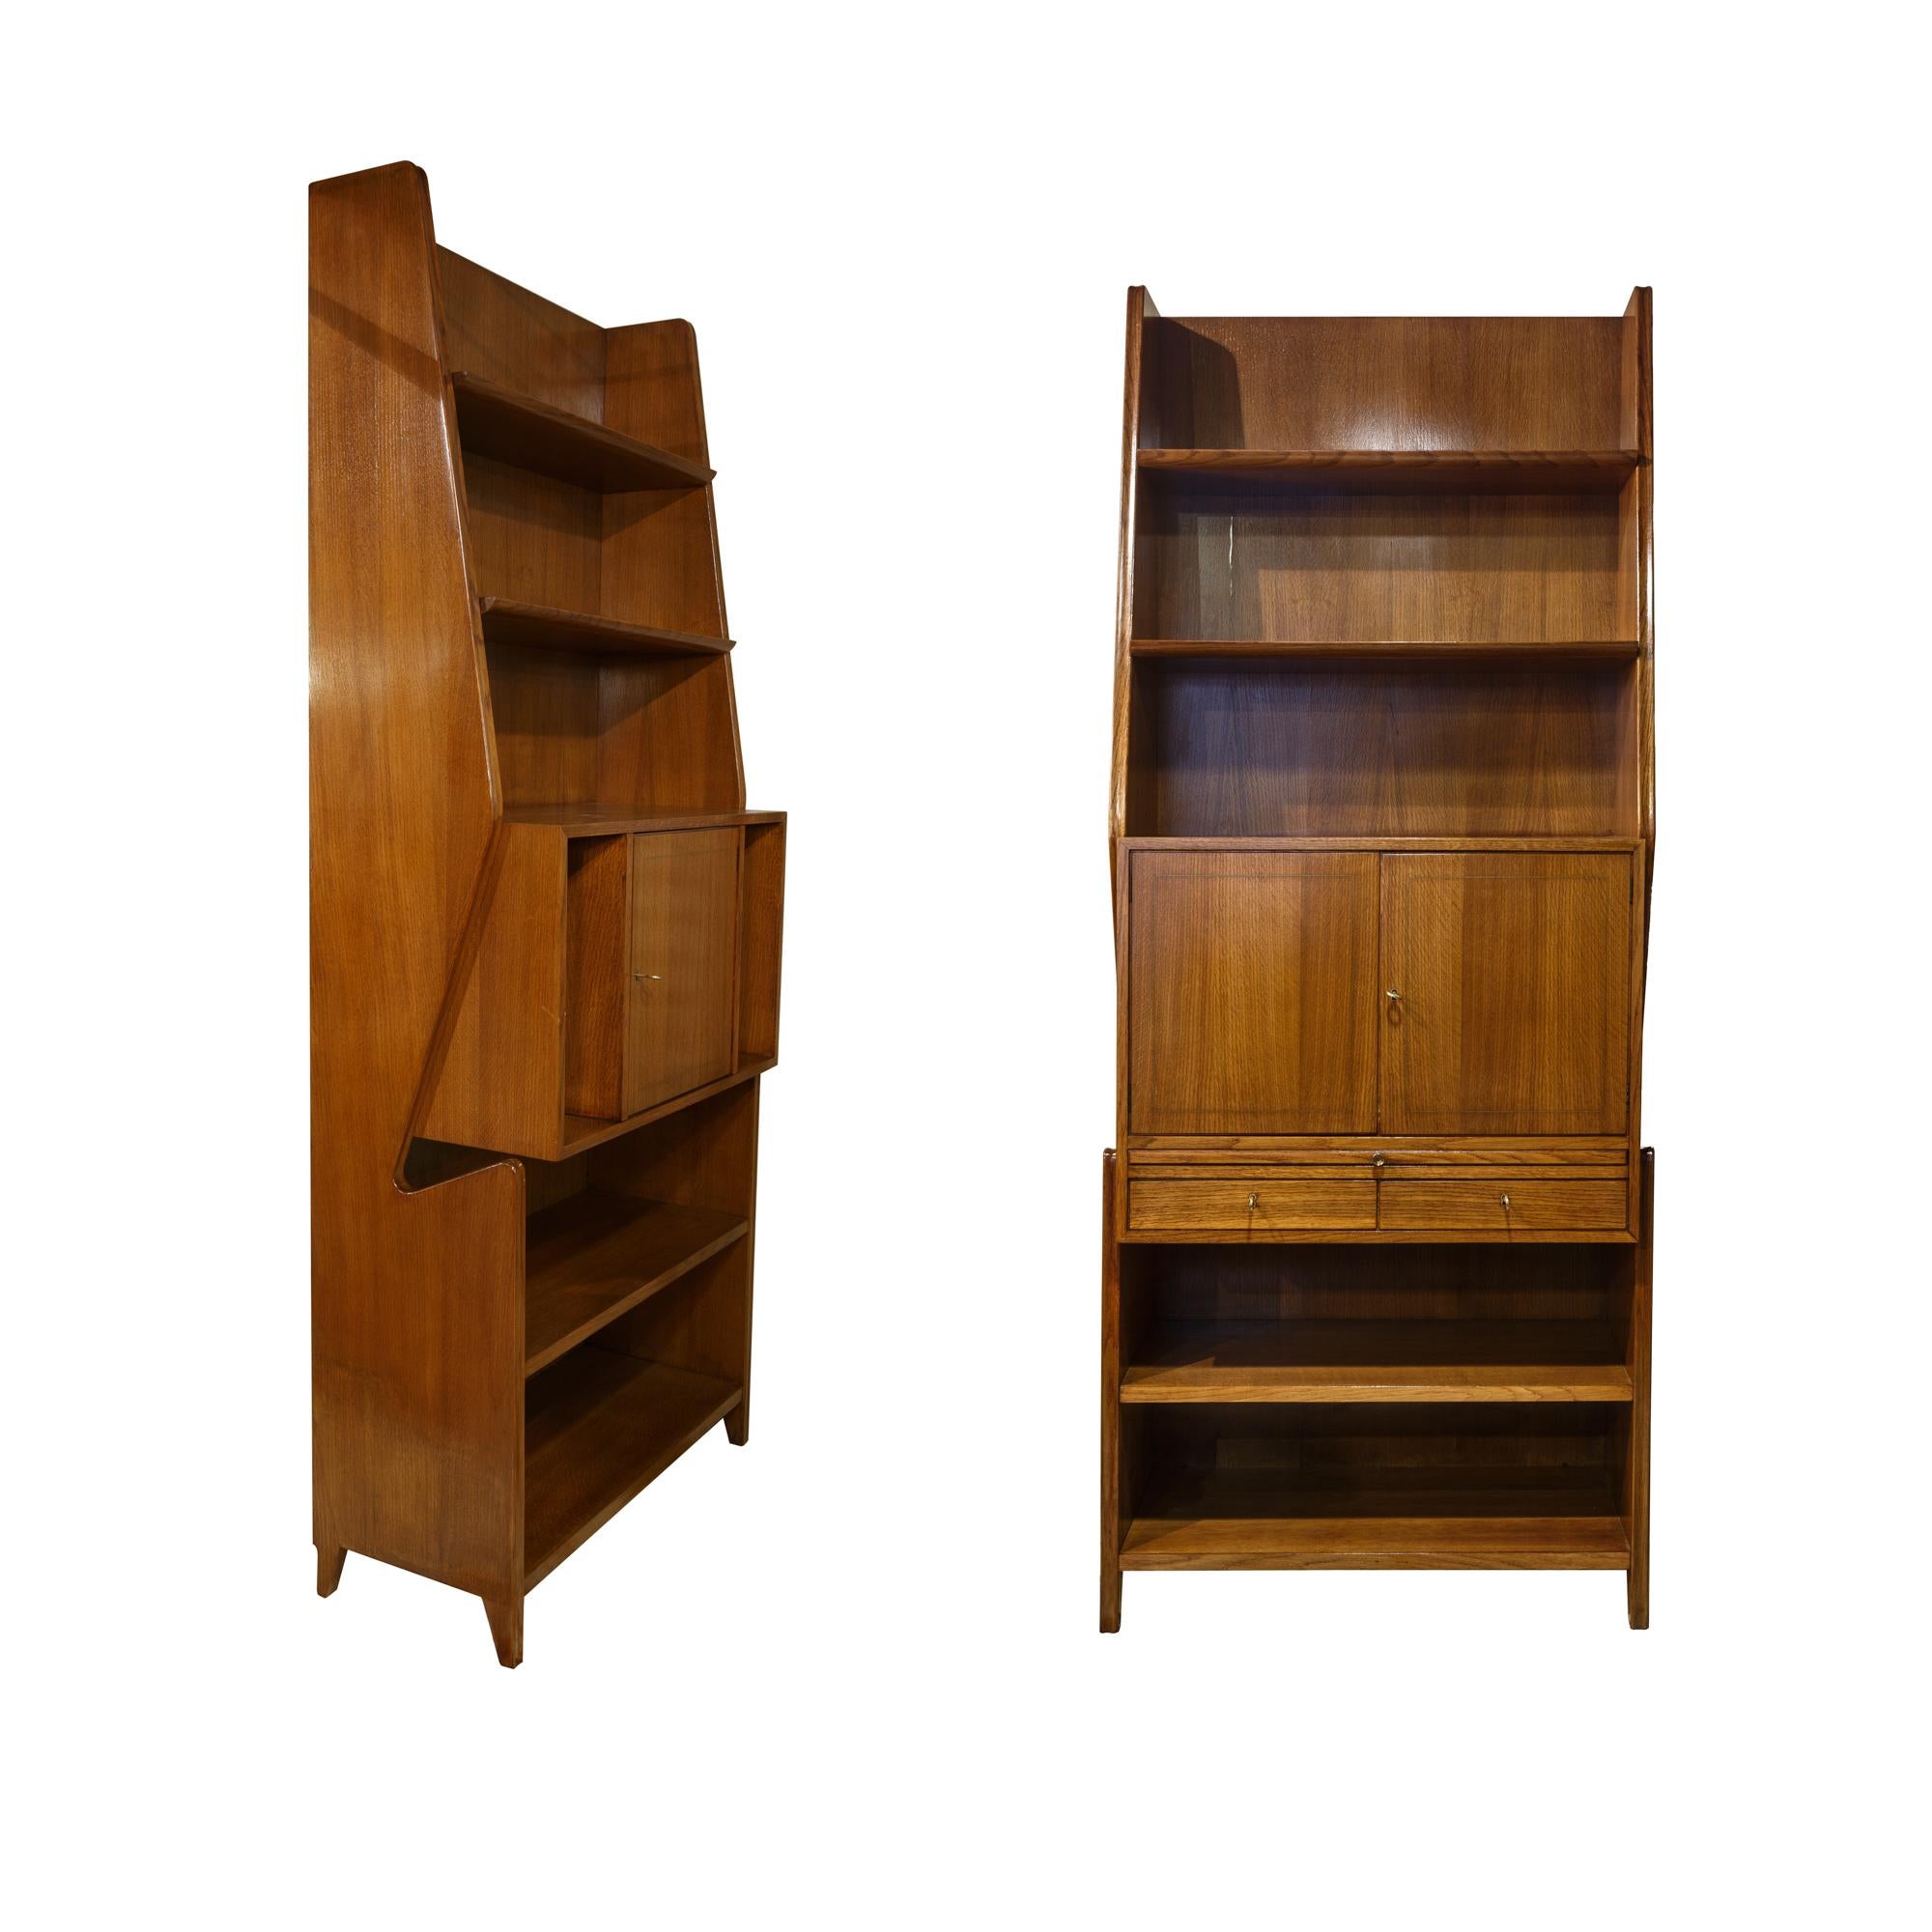 2 bookcases in Gio Ponti style 1950s Italy one of the two pieces of cabinets has a desk Interesting in design and very versatile for any environment , they give a touch of Italian design Mid-Century Modern 1950s.